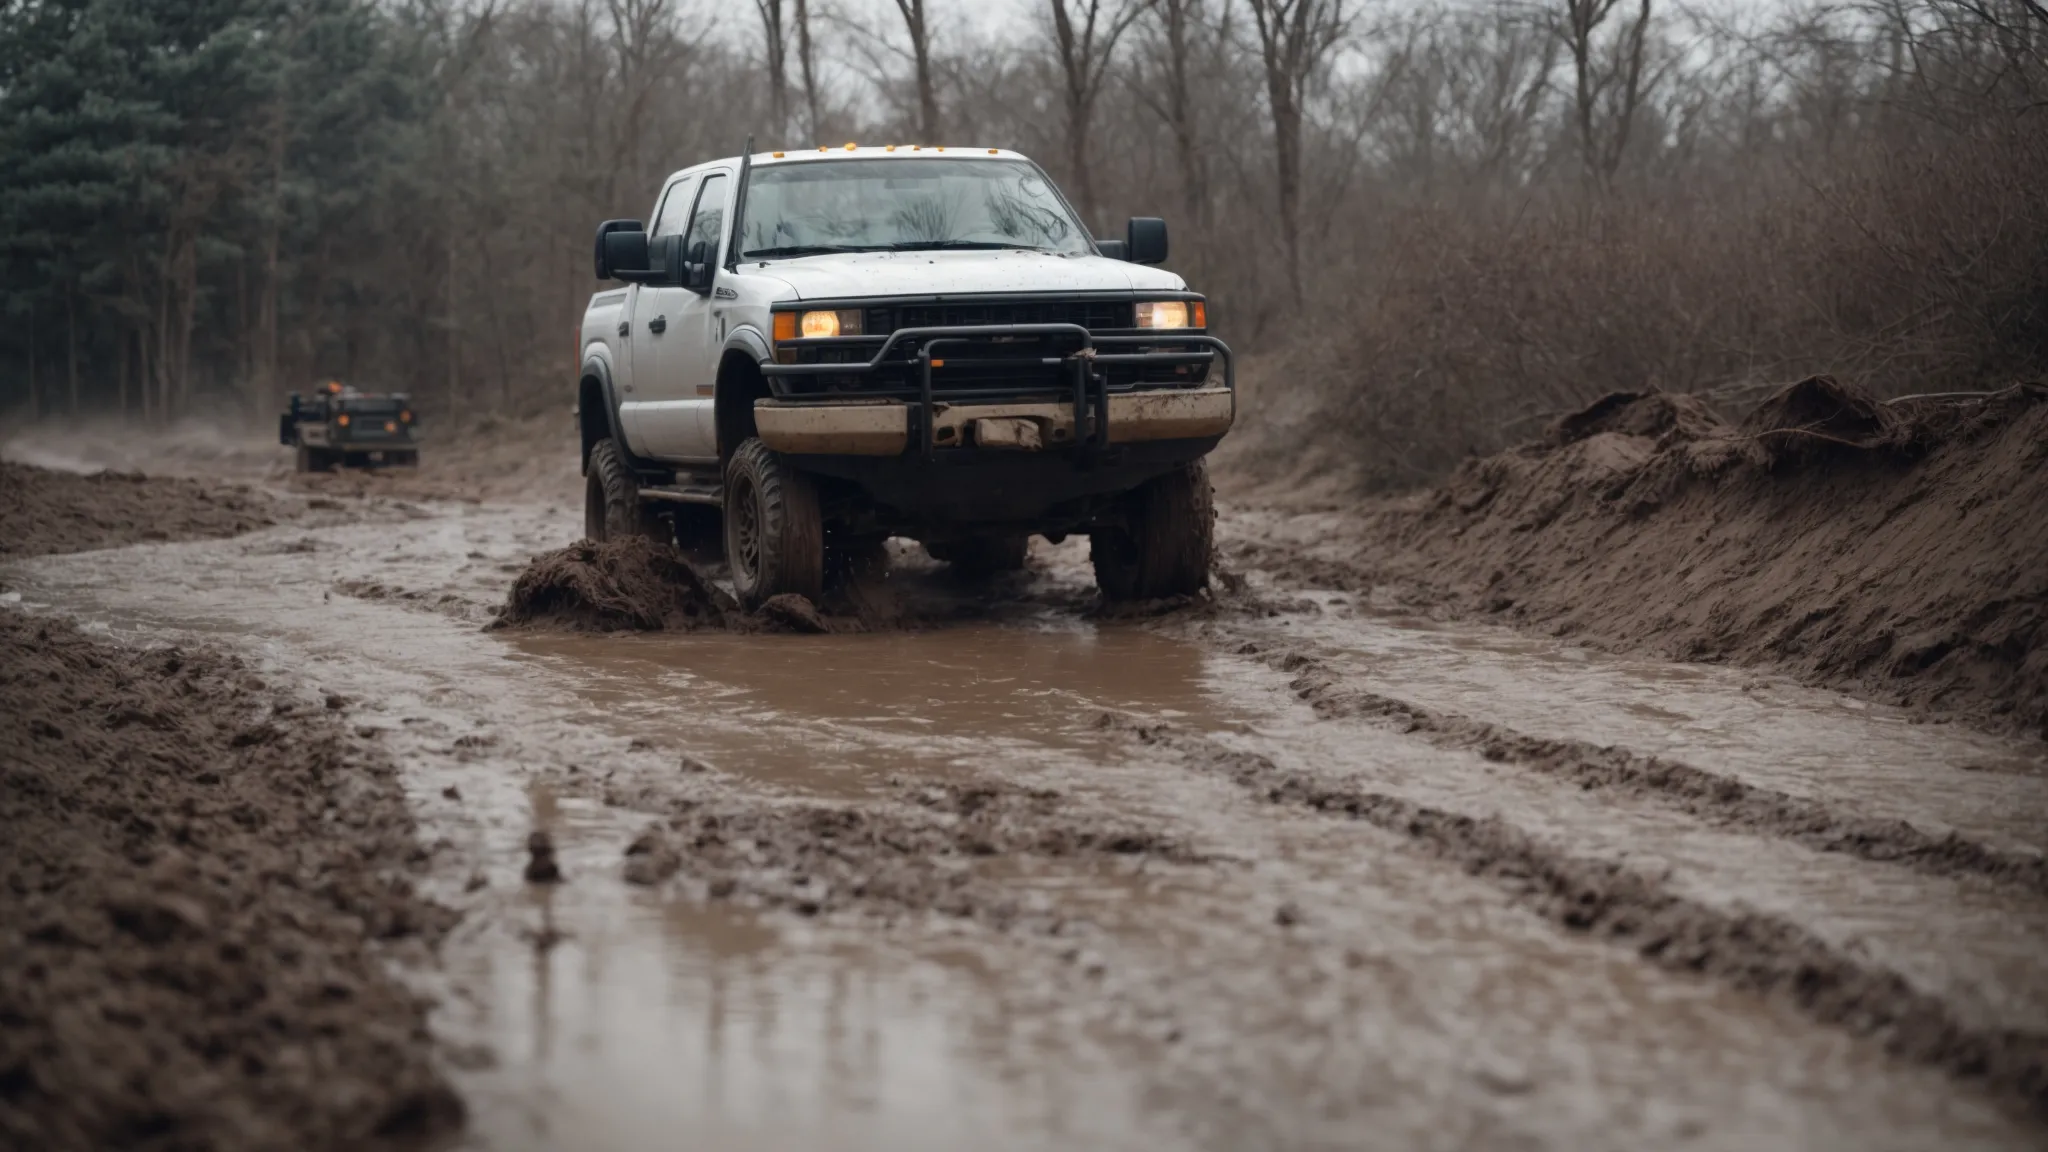 a vehicle is stuck in a large, muddy patch while a tow truck with a mounted winch prepares to pull it free.